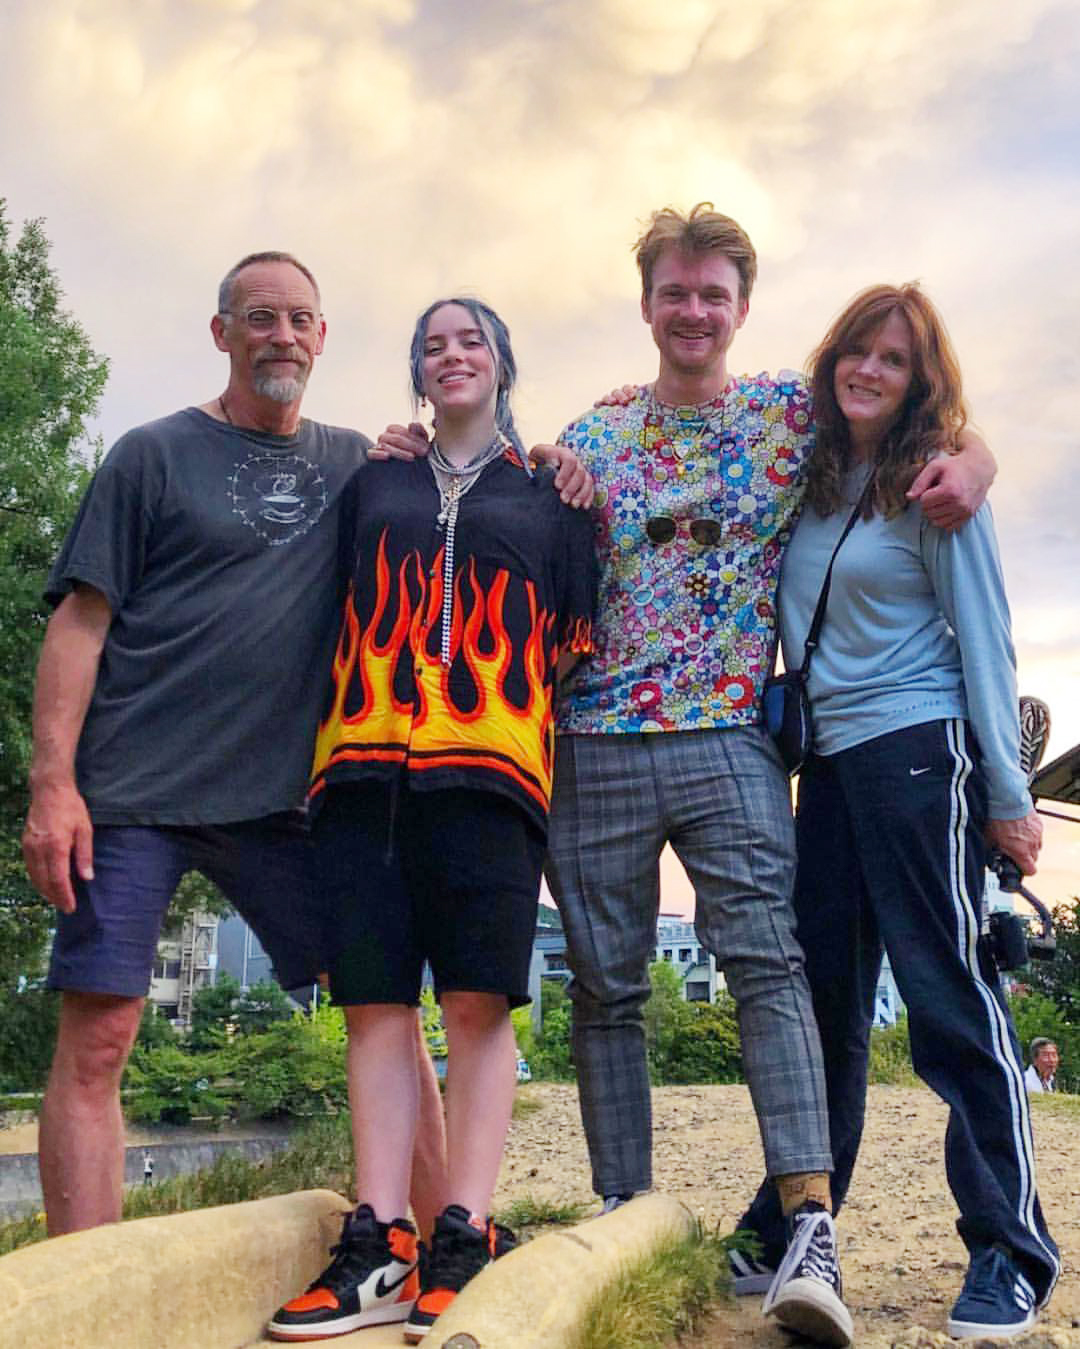 Billie Eilish with her family in beautiful weather